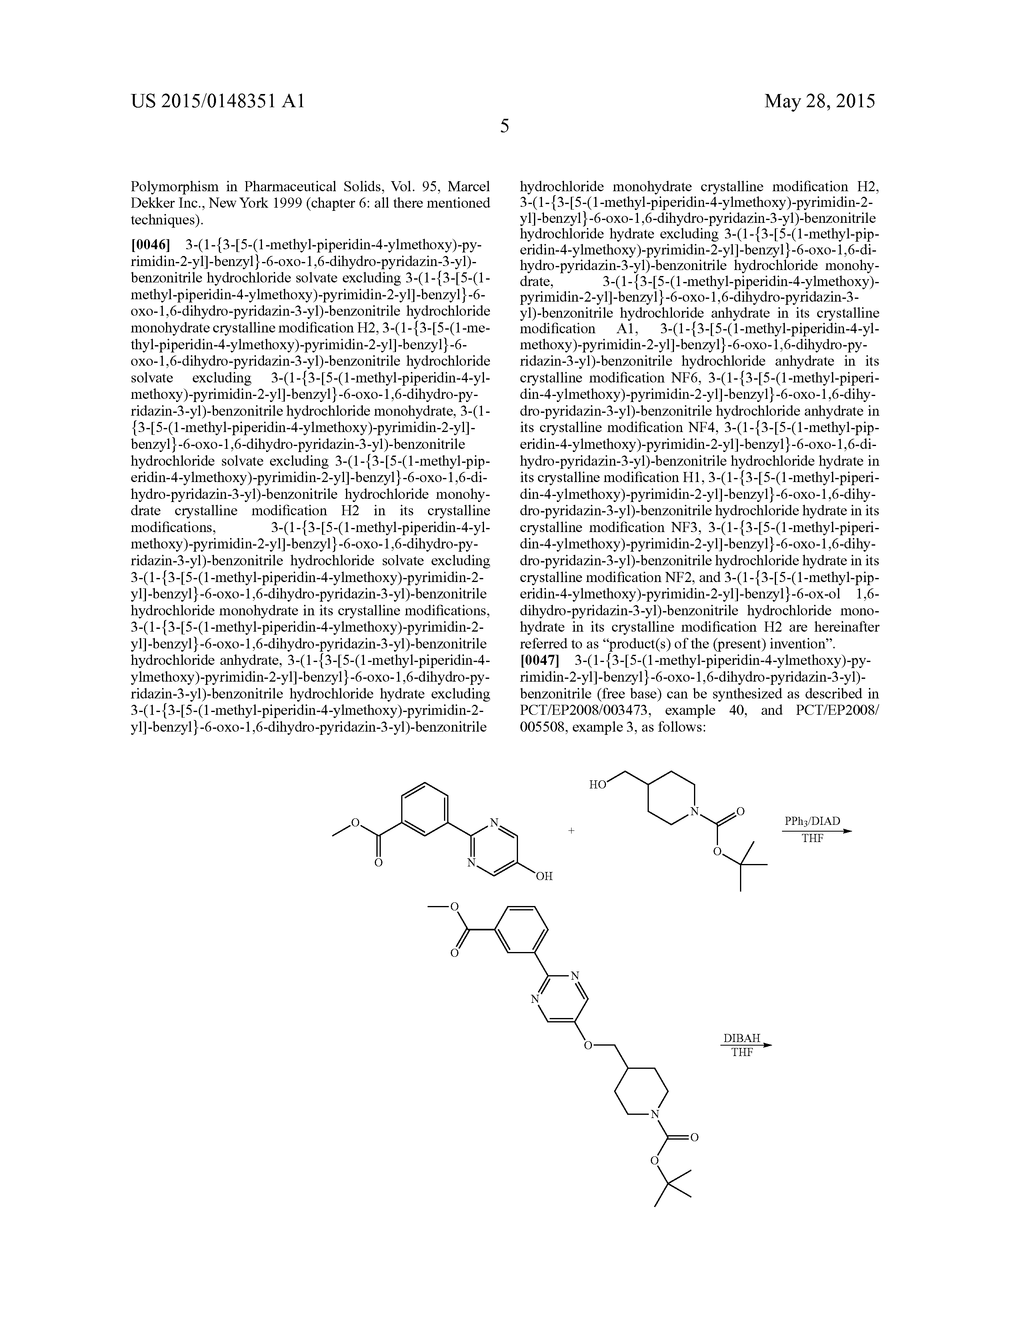 NOVEL POLYMORPHIC FORMS OF     3-(1--6-OXO-1,6-DIHYDRO-PYRIDAZIN-3-YL)-BENZONITRILE HYDROCHLORIDE SALT     AND PROCESSES OF MANUFACTURING THEREOF - diagram, schematic, and image 44